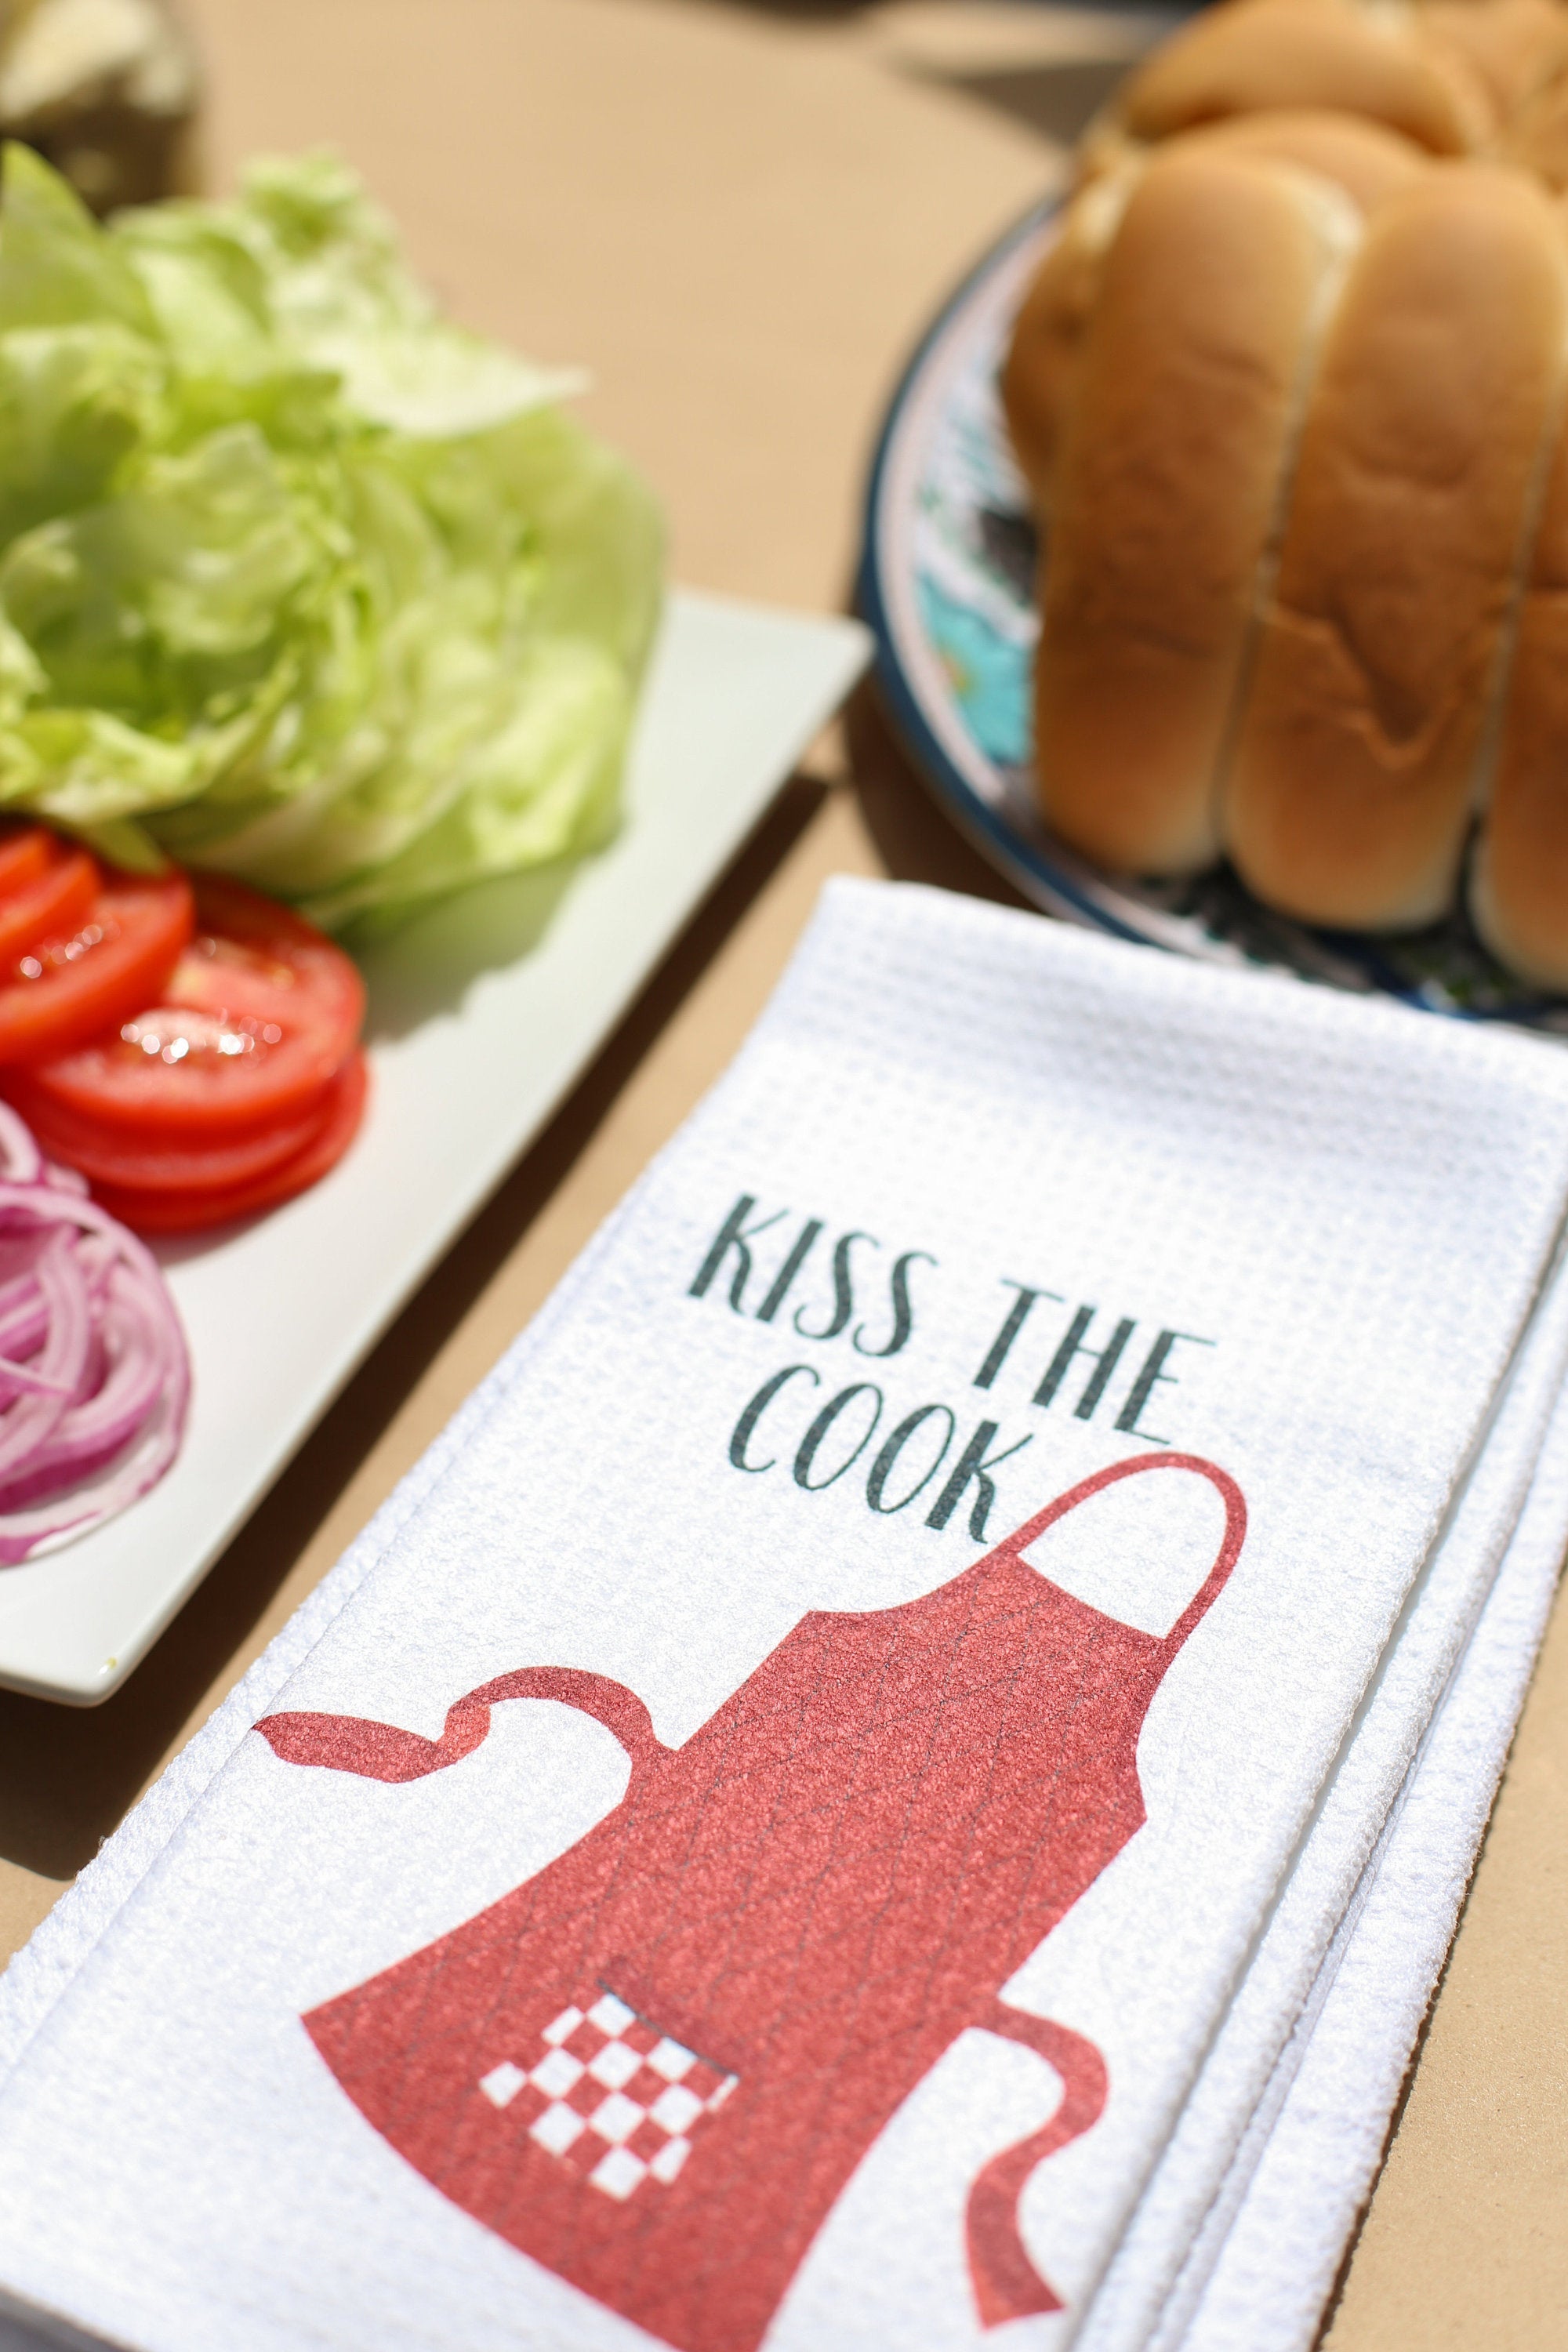 Funny Utility Towel for Grilling - Only Smoke the Good Stuff